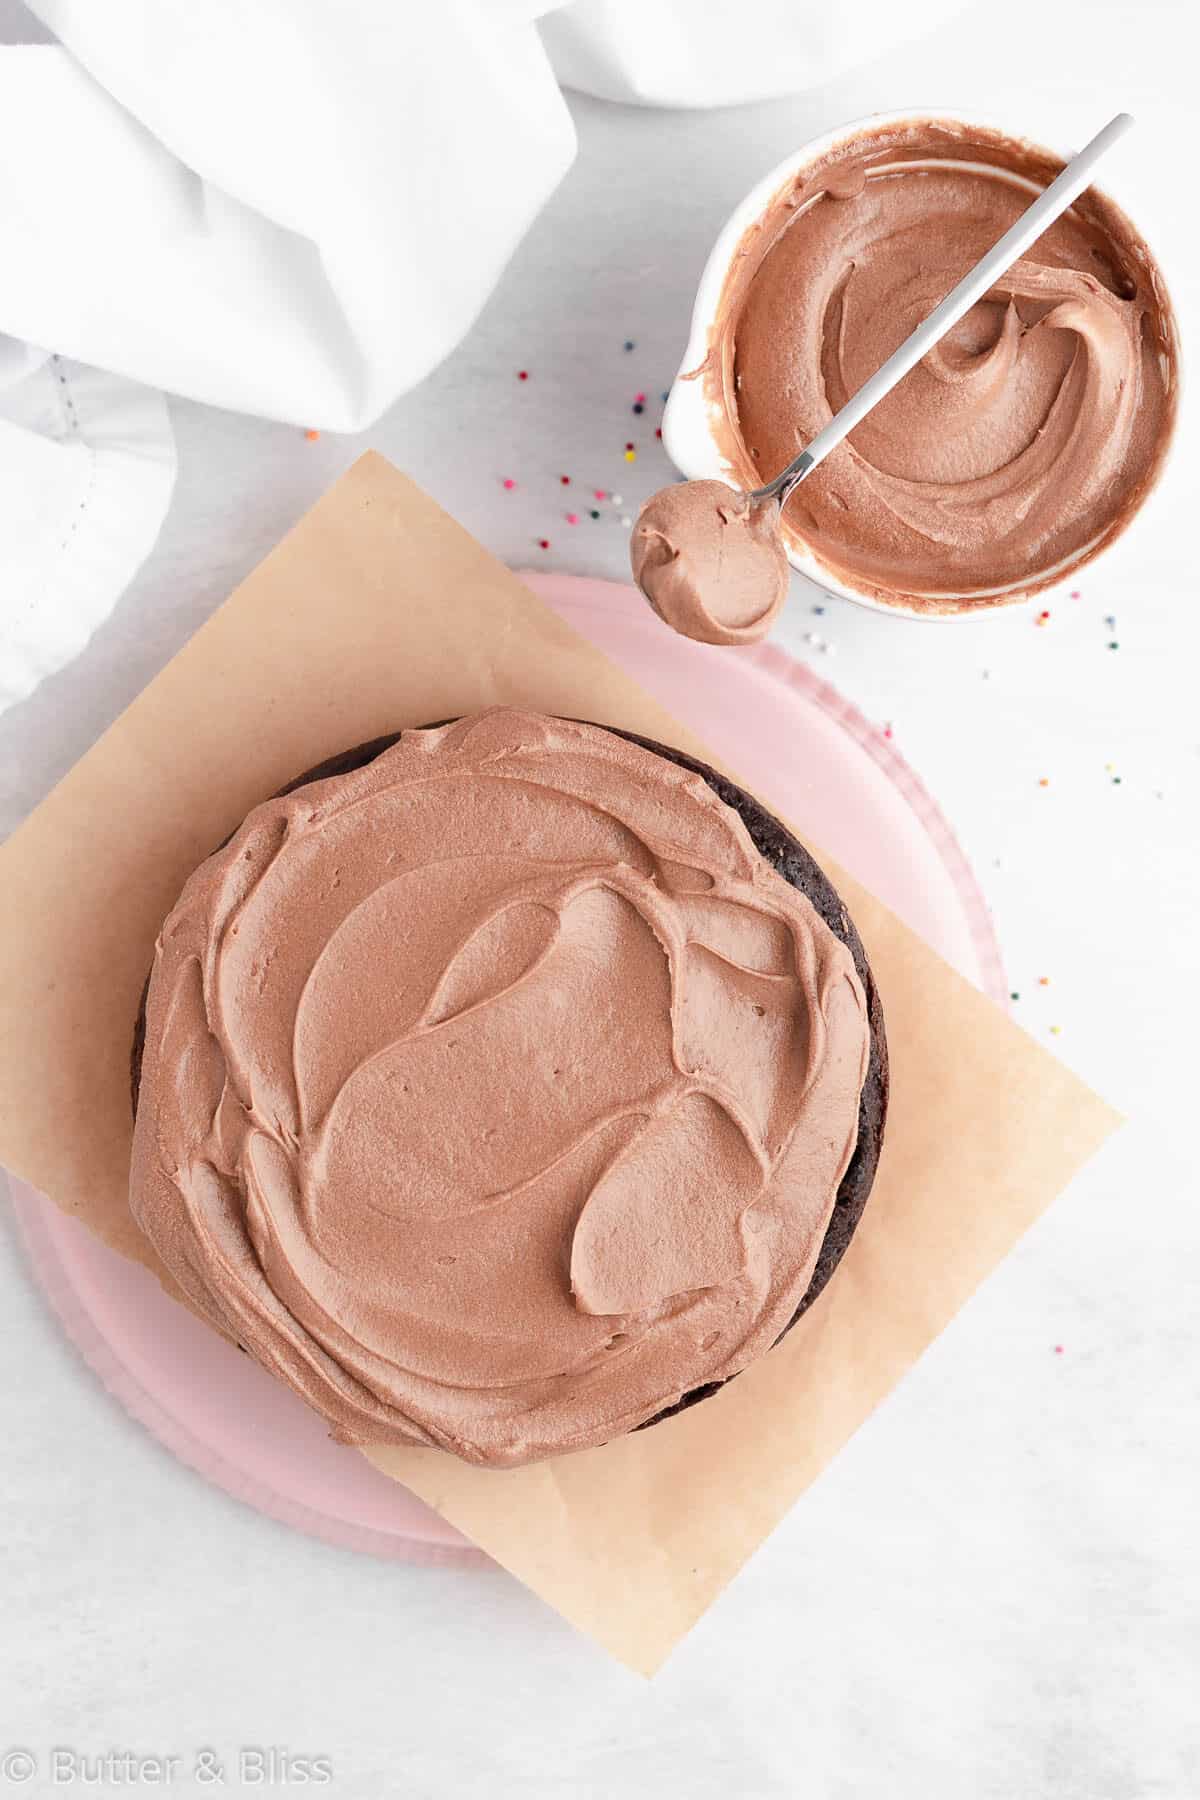 Chocolate dairy free frosting on a cake